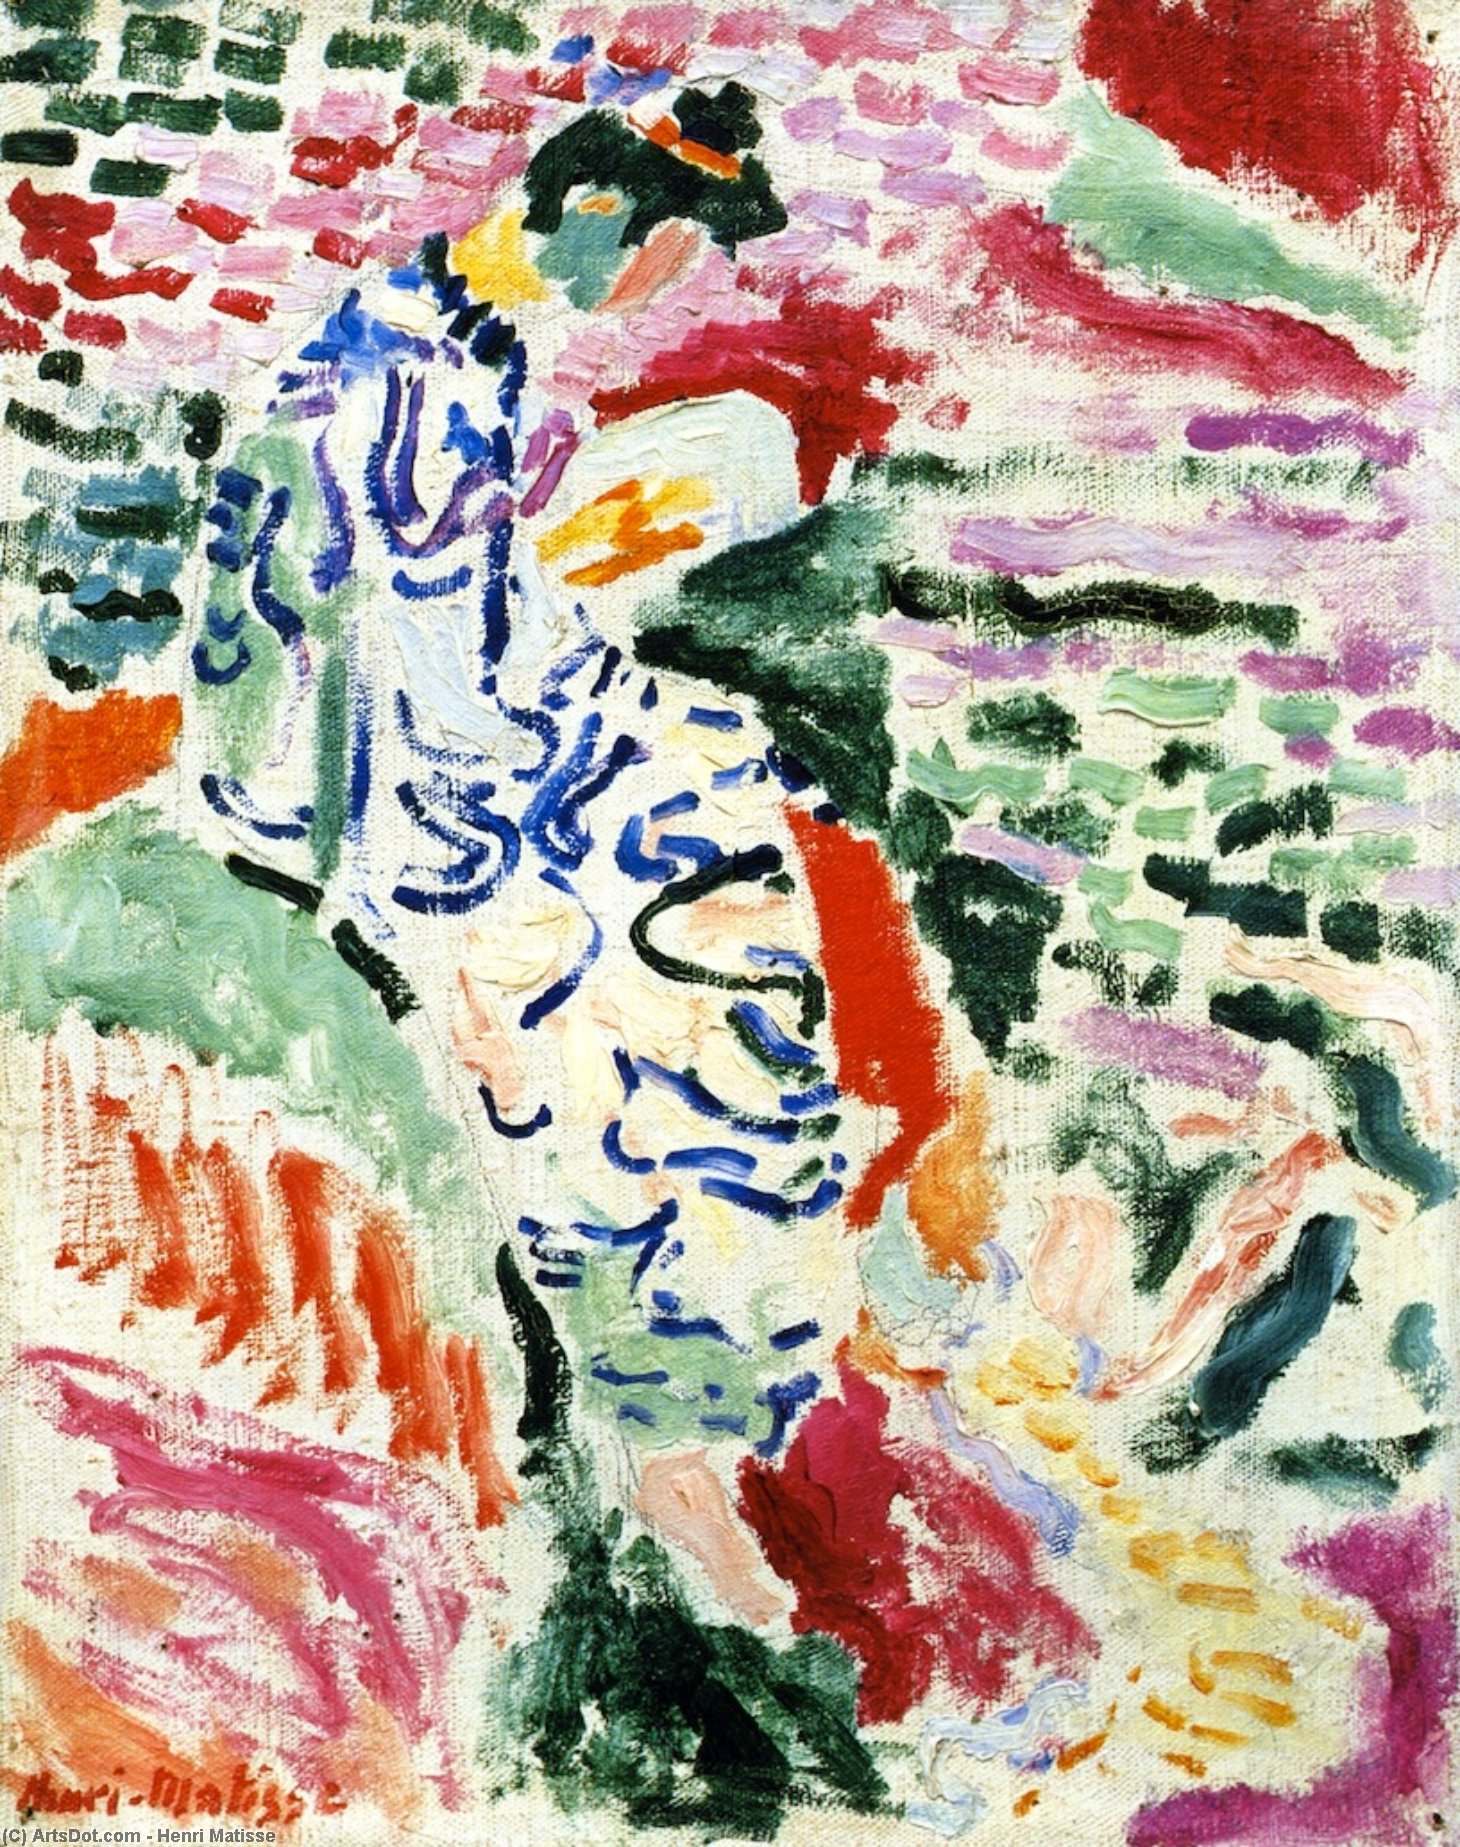 WikiOO.org - 백과 사전 - 회화, 삽화 Henri Matisse - Japanese Woman at the Seashore (also known as Woman beside the Water)